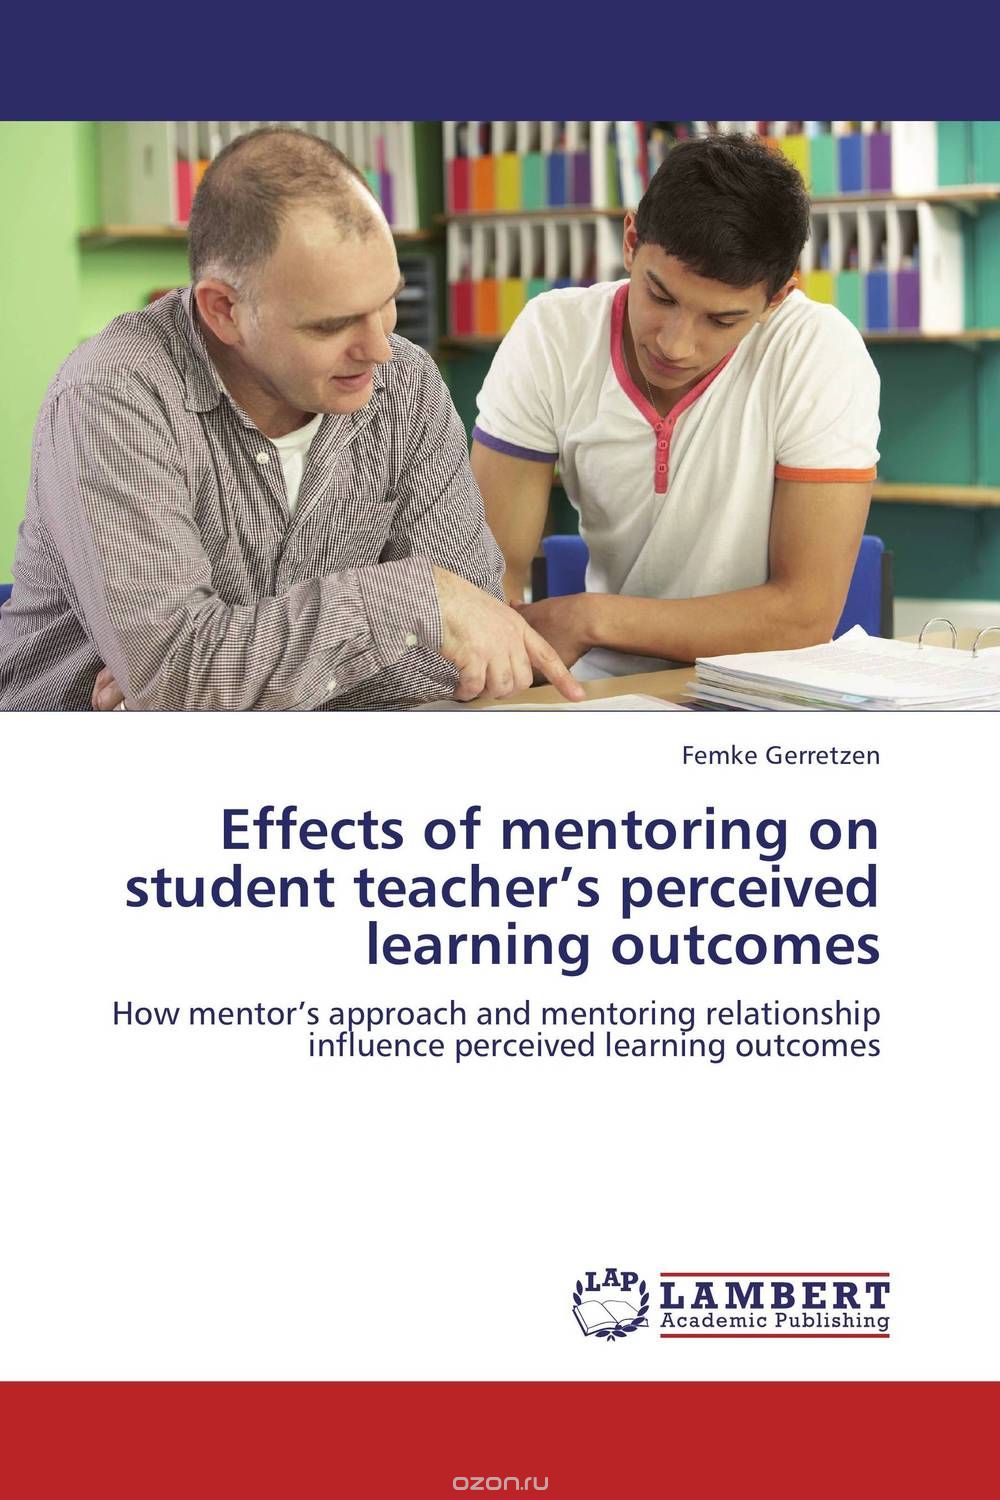 Effects of mentoring on student teacher’s perceived learning outcomes